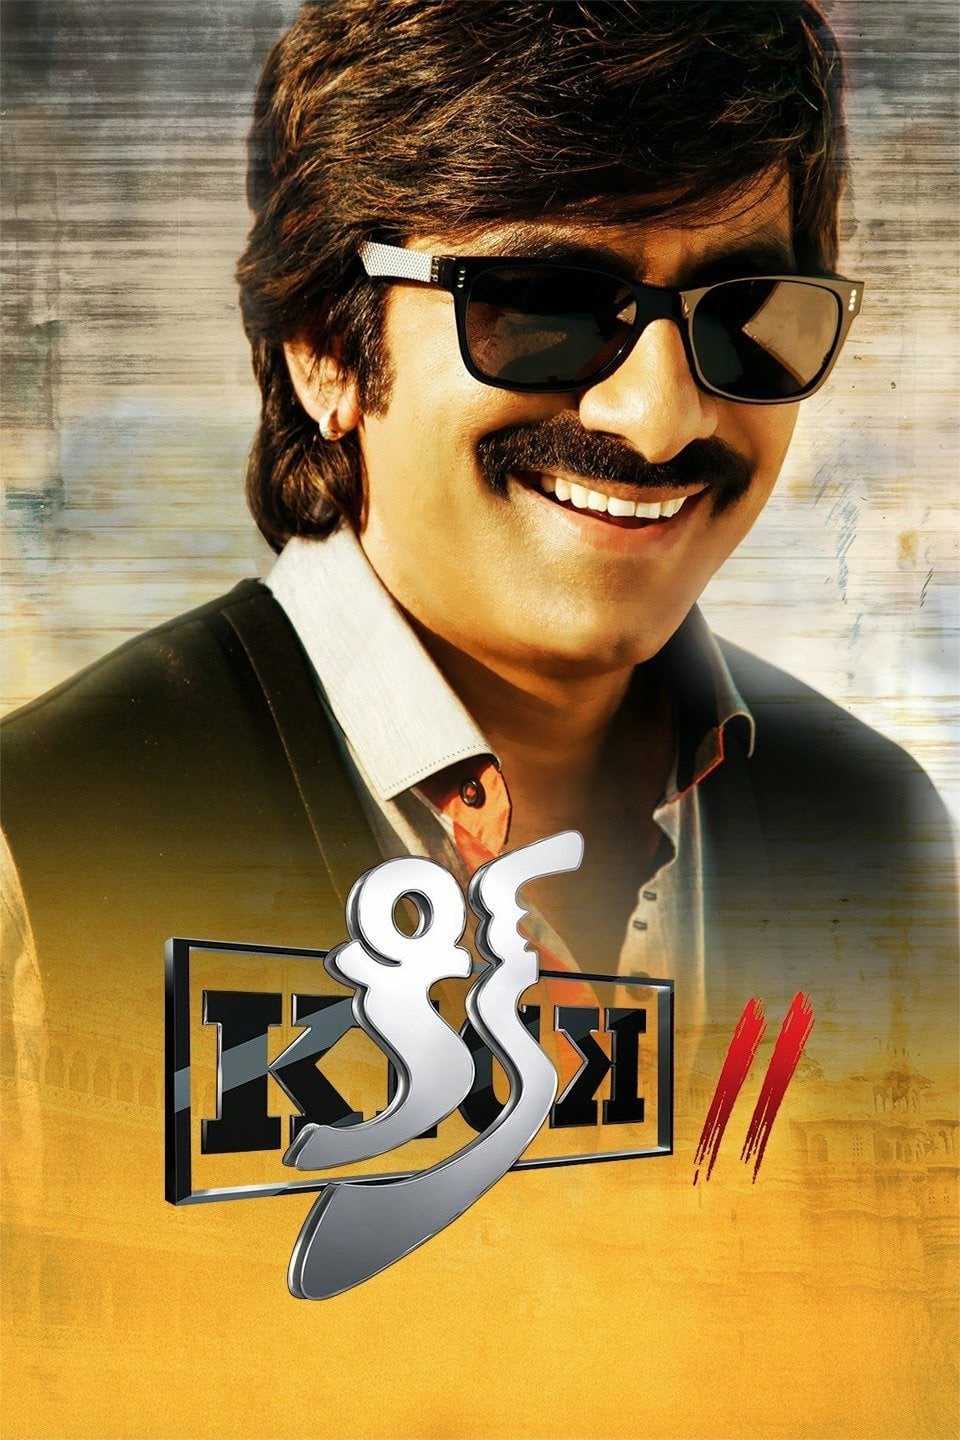 Poster for the movie "Kick 2"